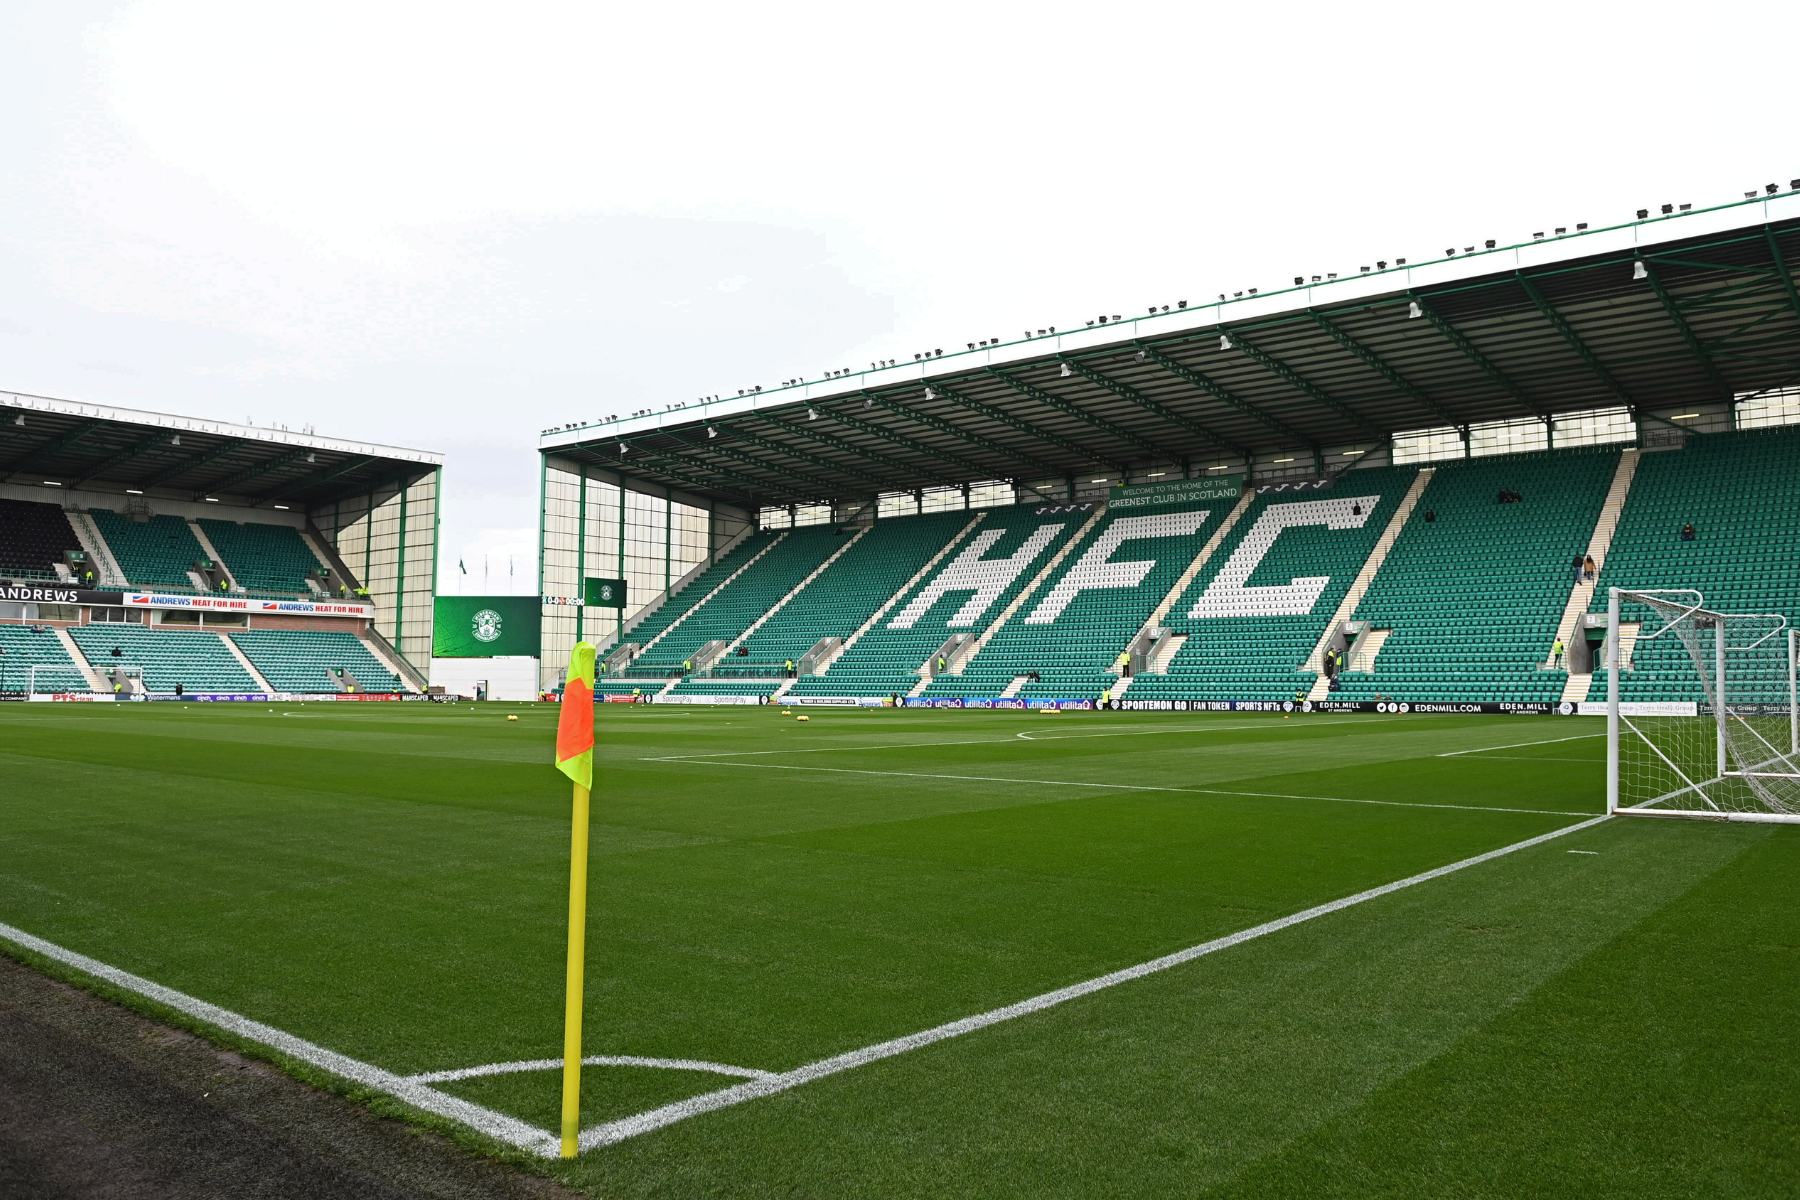 Ross County vs Hibs postponed due to Covid outbreak at Easter Road club